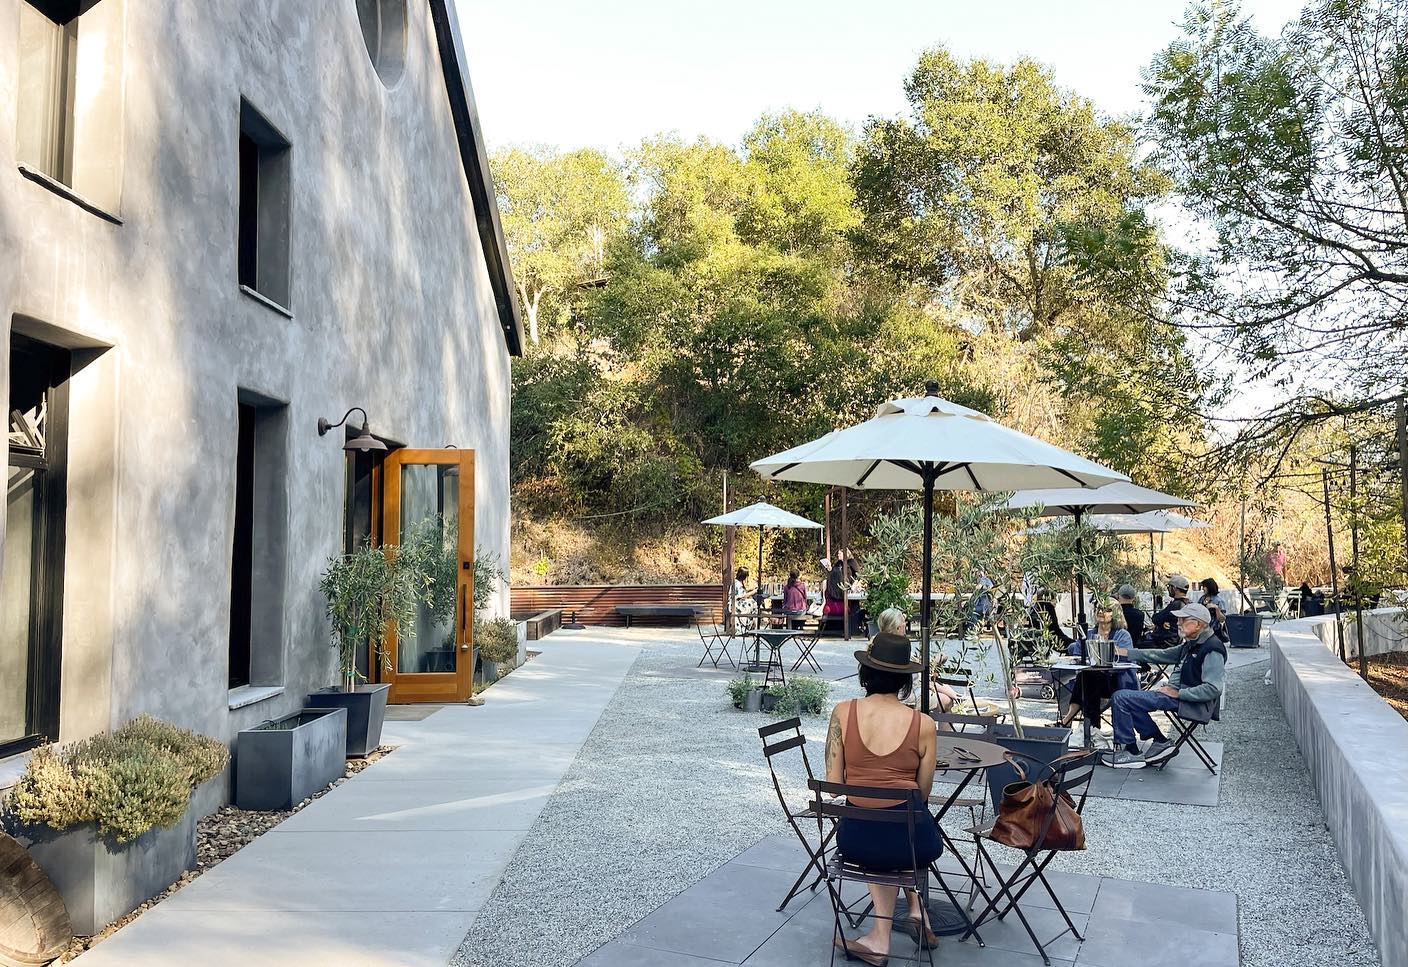 Outdoor patio seating with umbrella coverage at Storrs Vineyard and Winery in Santa Cruz Mountains